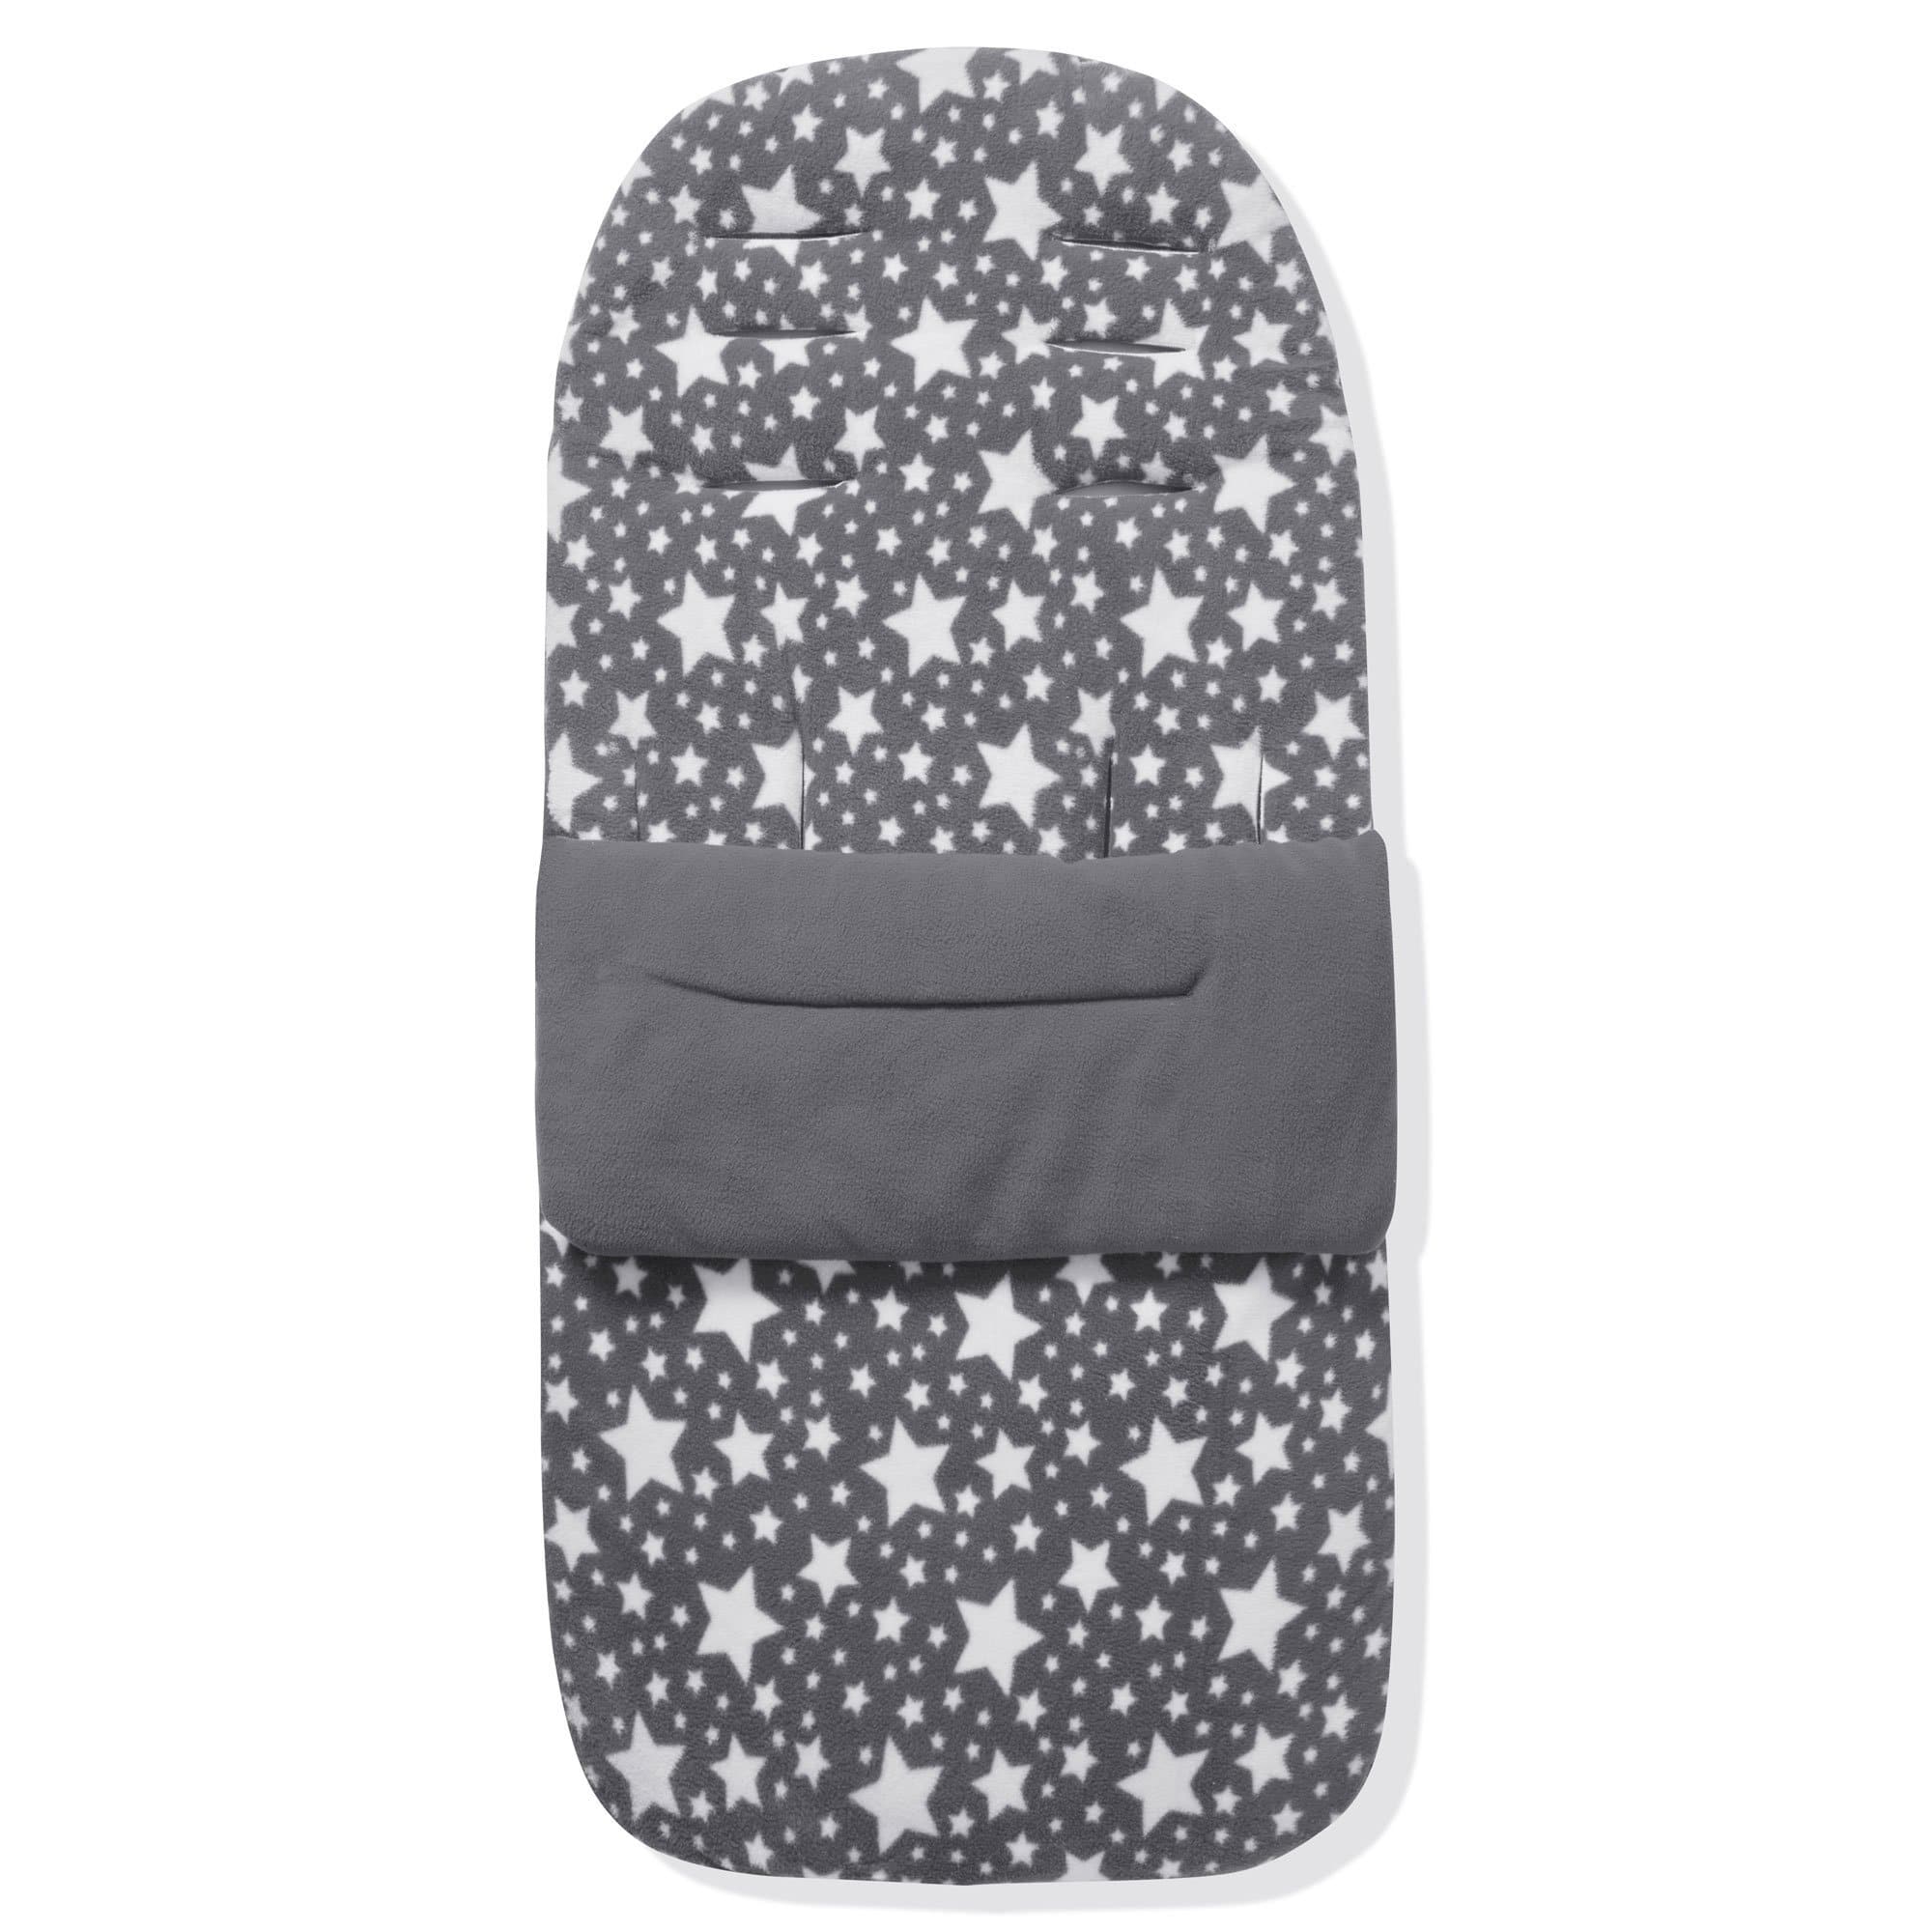 Fleece Footmuff / Cosy Toes Compatible with GB - Grey Star / Fits All Models | For Your Little One